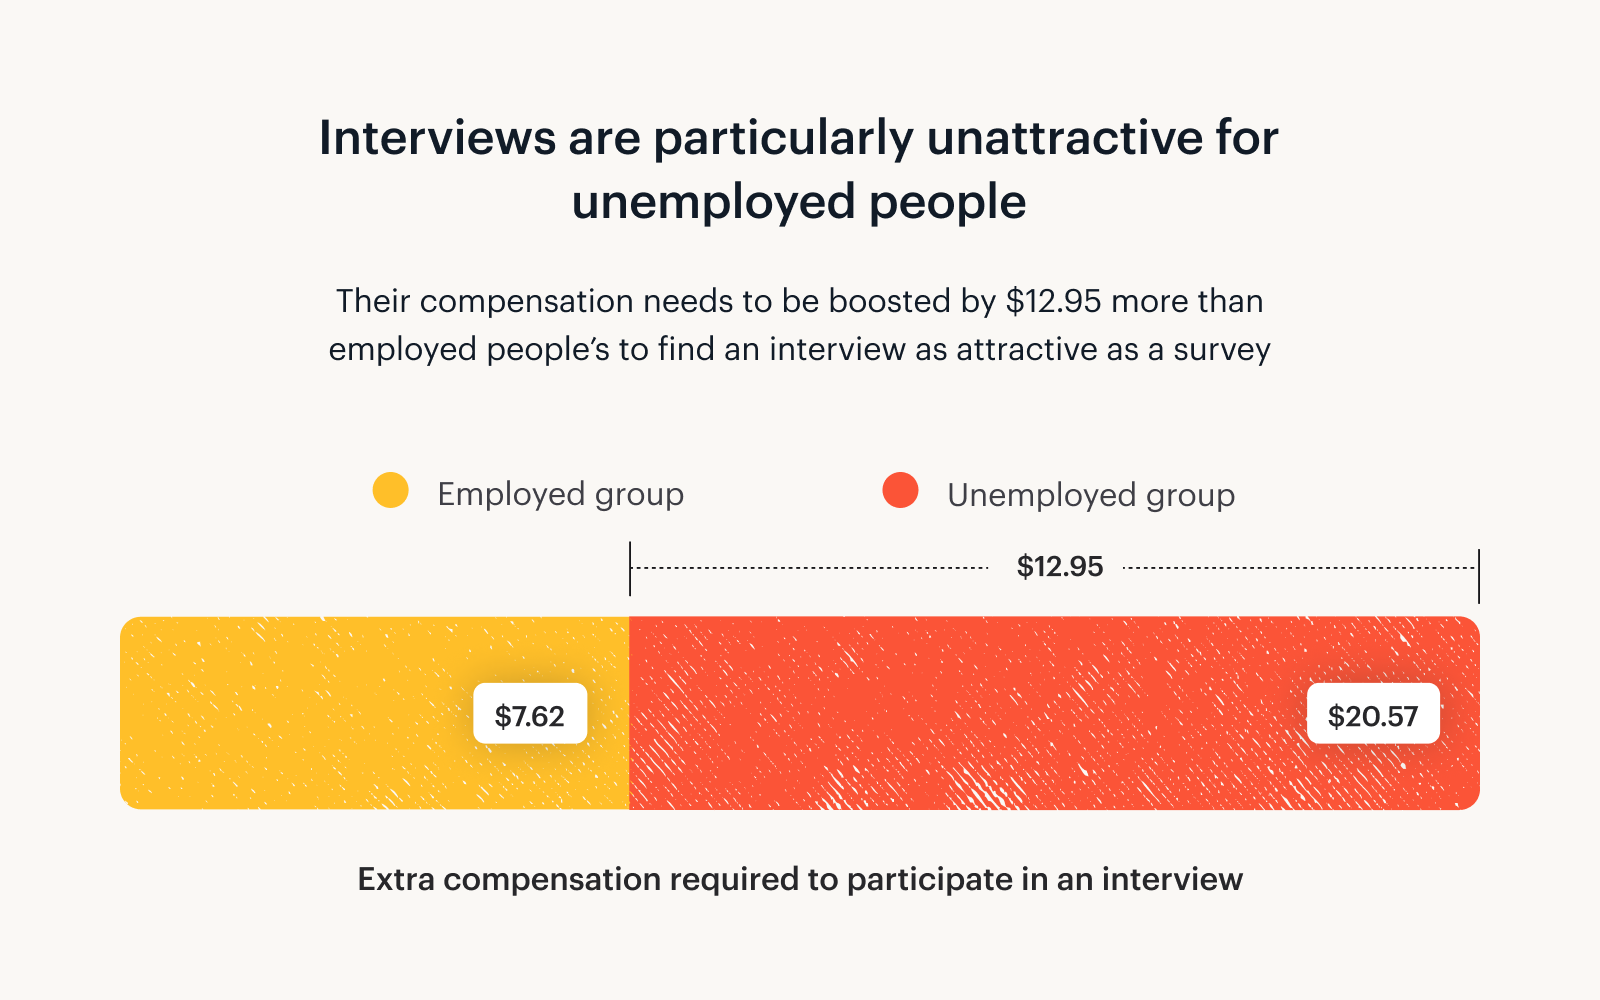 A graph showing that unemployed people need $12.95 more than employed people to find an interview as attractive as a survey.